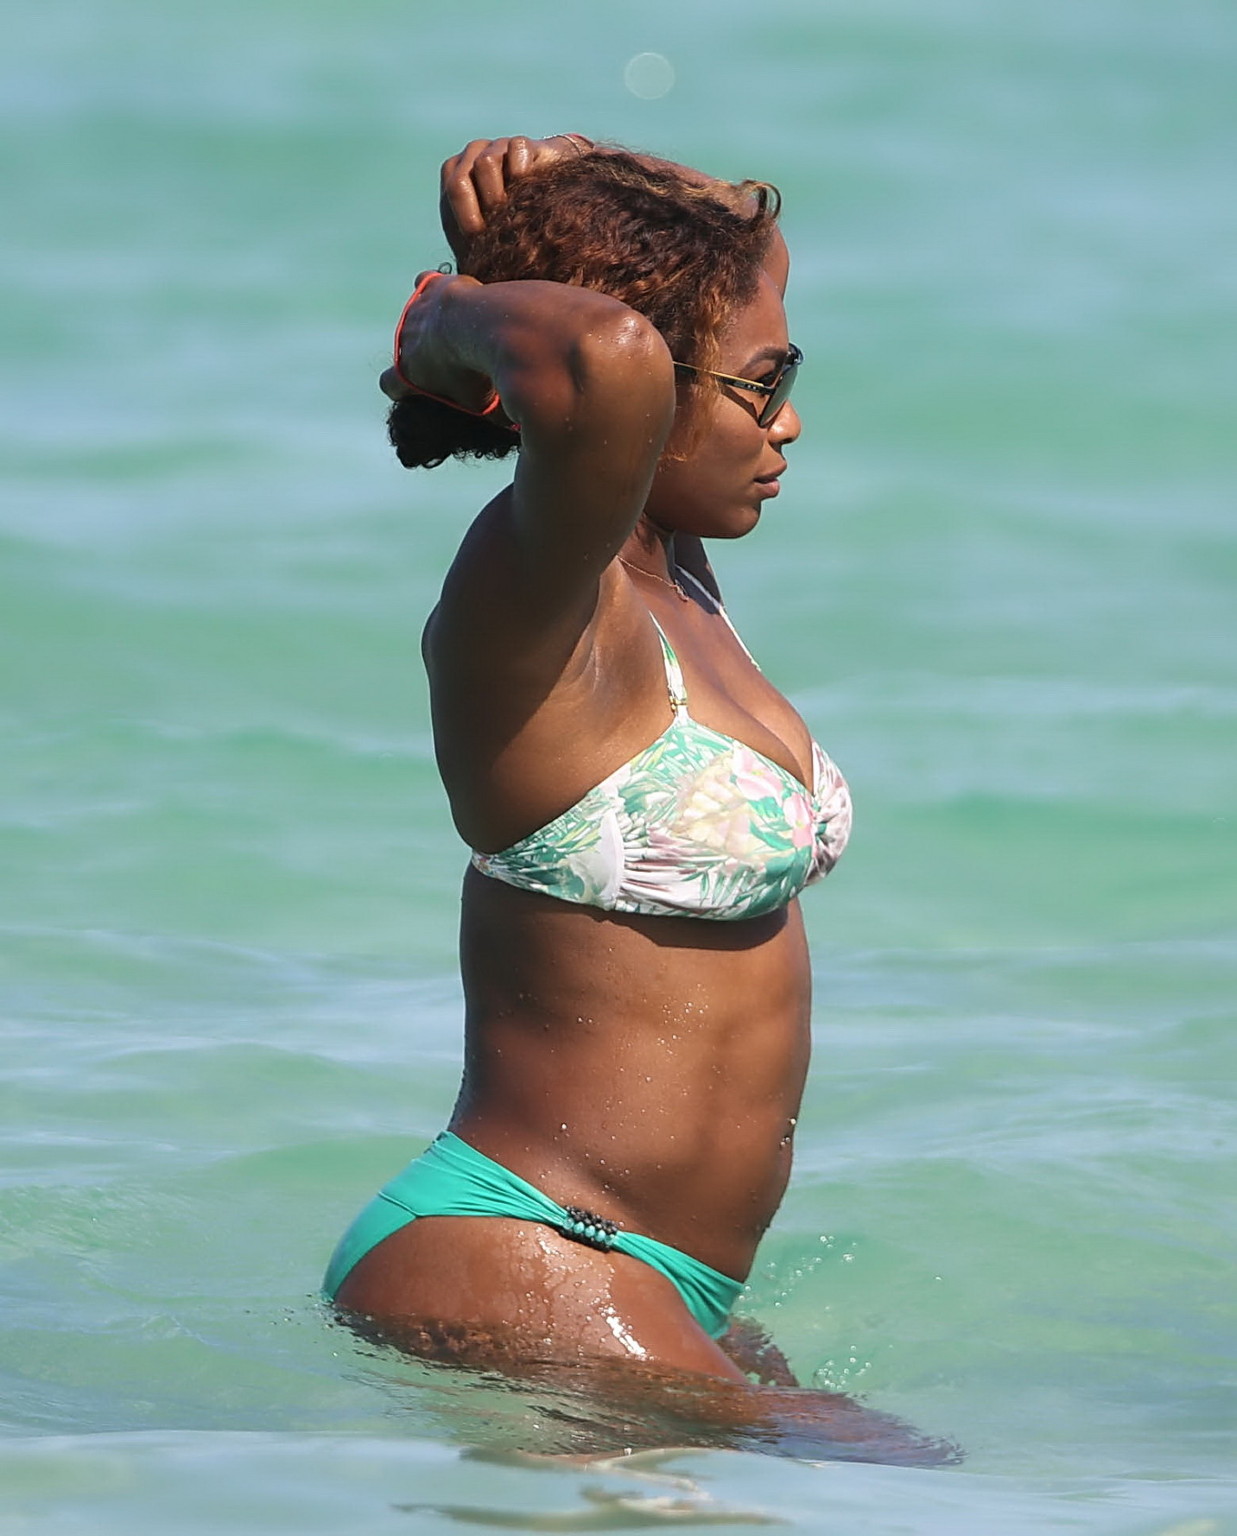 Serena Williams showing off her bikini curves at the beach in Miami #75228604